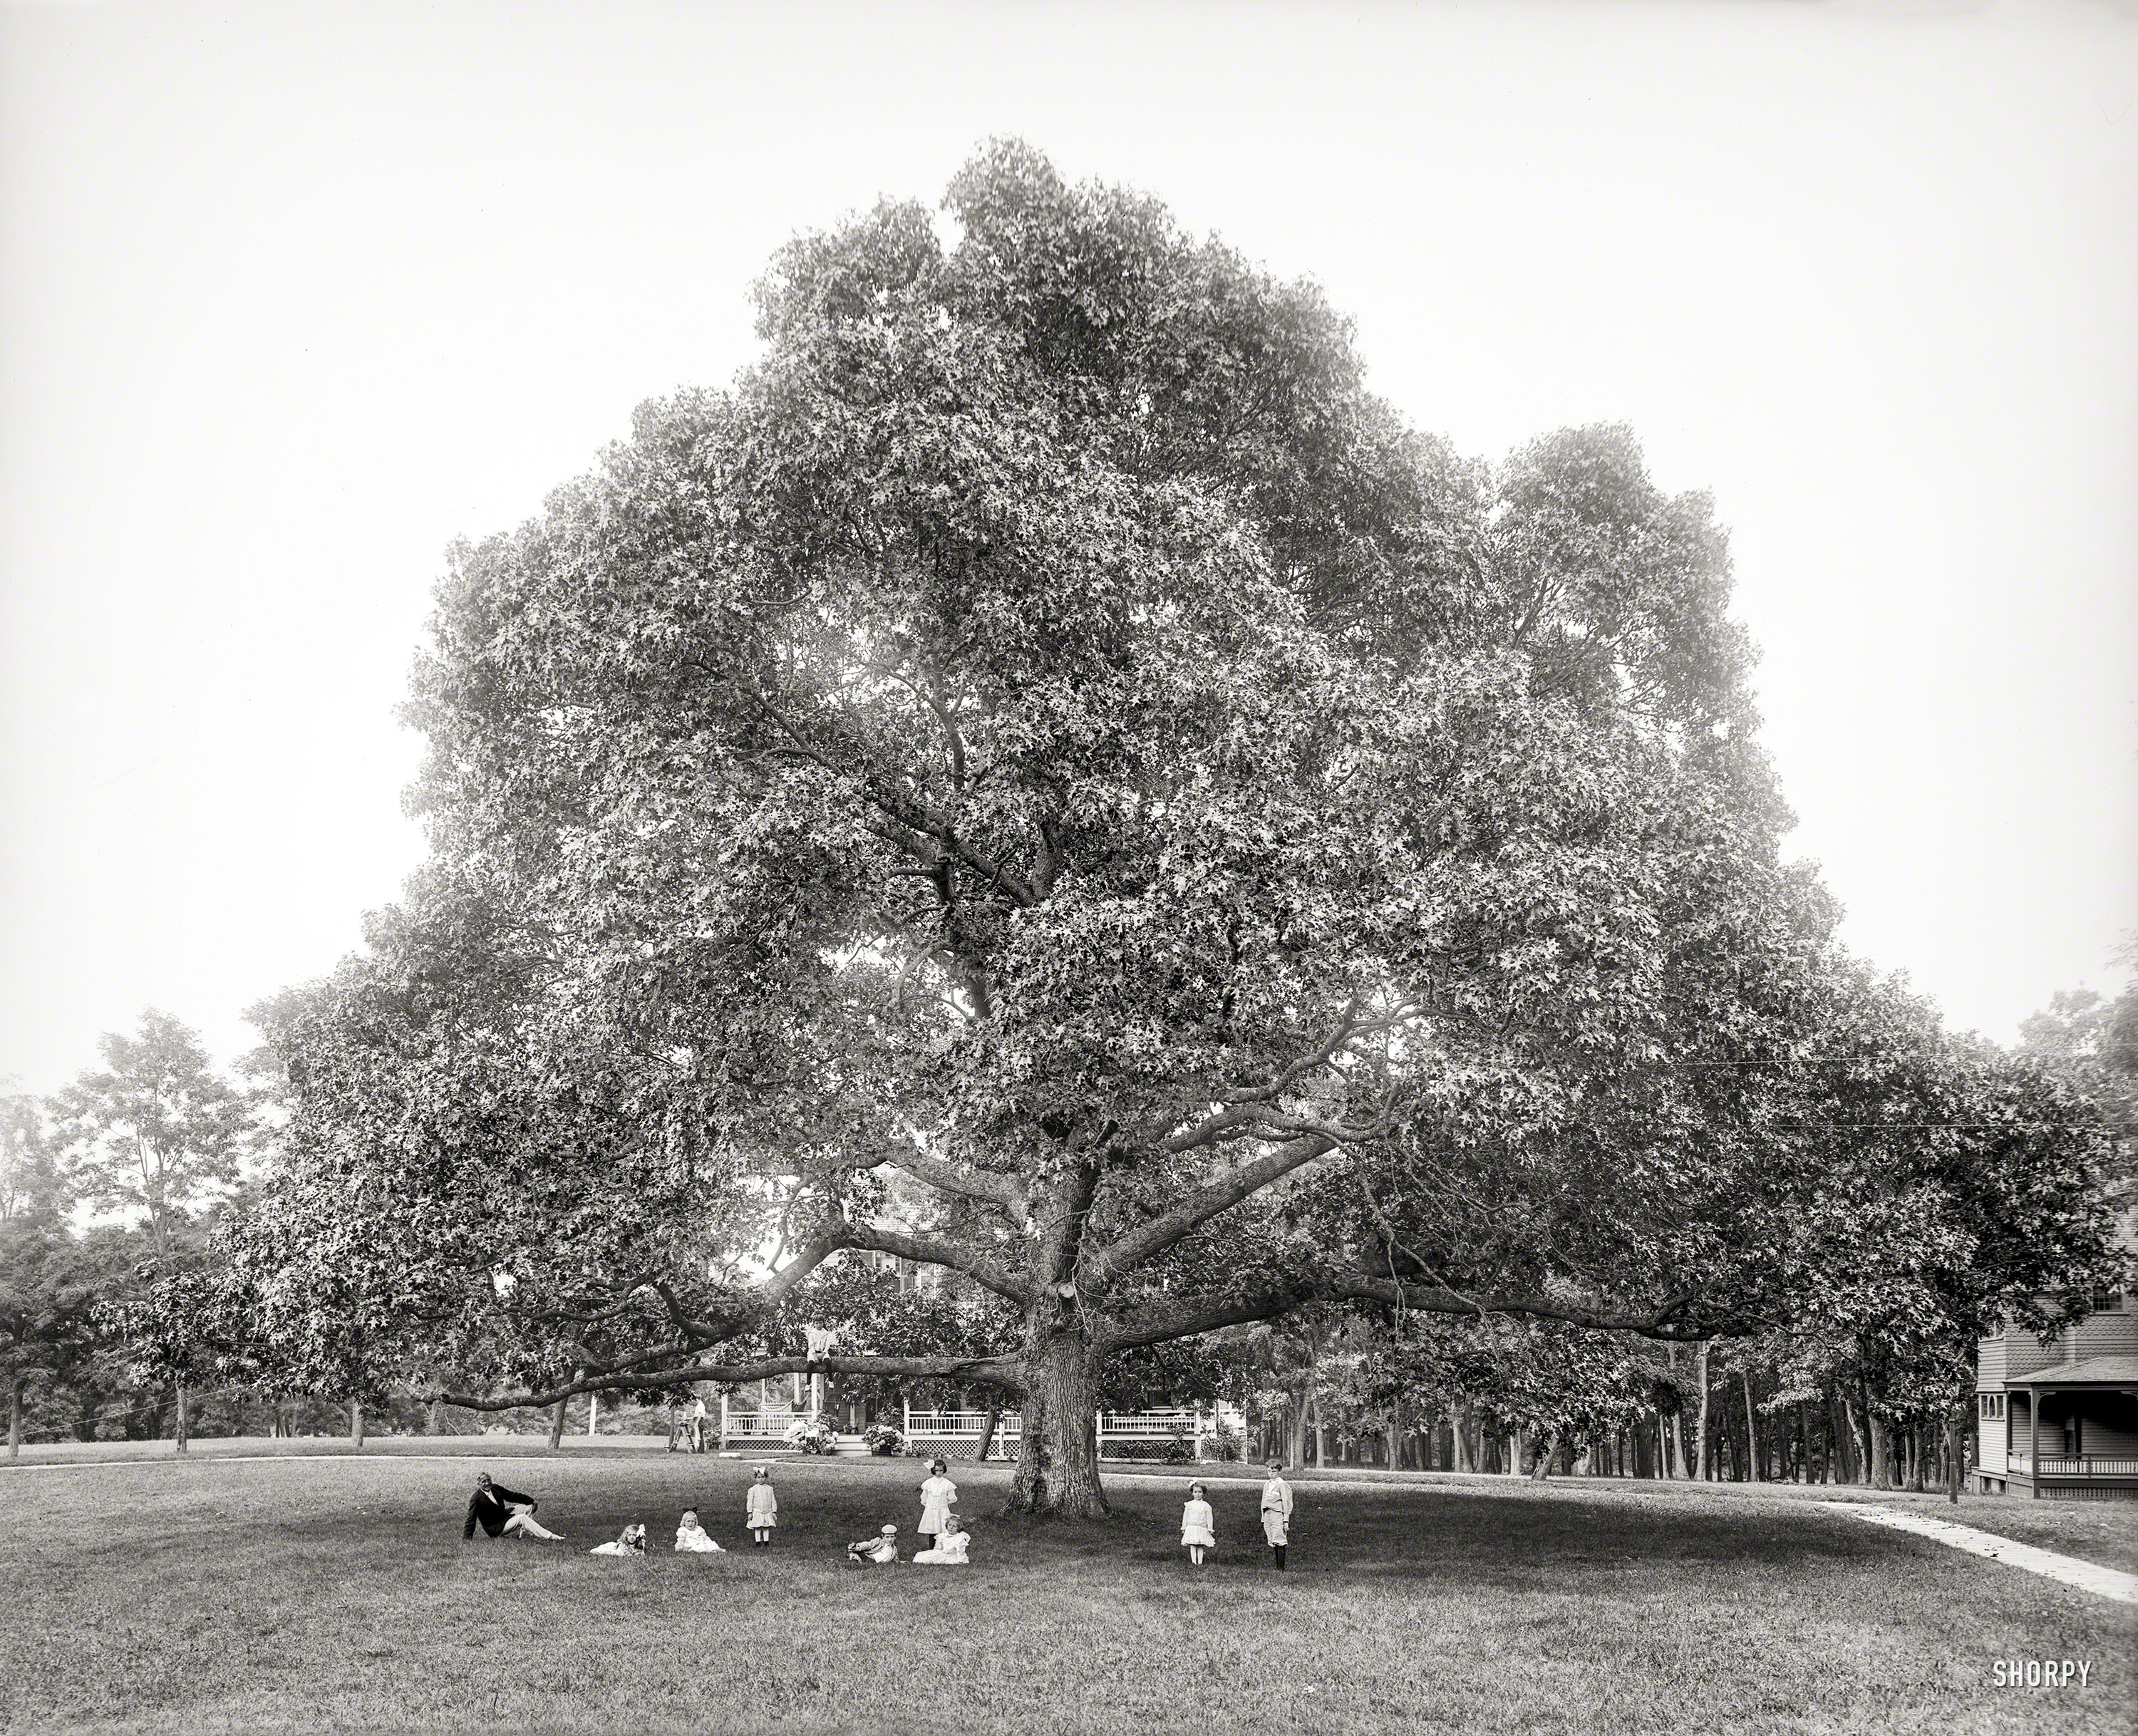 1904. "Under the great oak, Manhanset Manor, Shelter Island, N.Y." The same gent seen earlier perched on the railing, possibly William Henry Jackson with his grandchildren. 8x10 glass negative, Detroit Publishing Co. View full size.